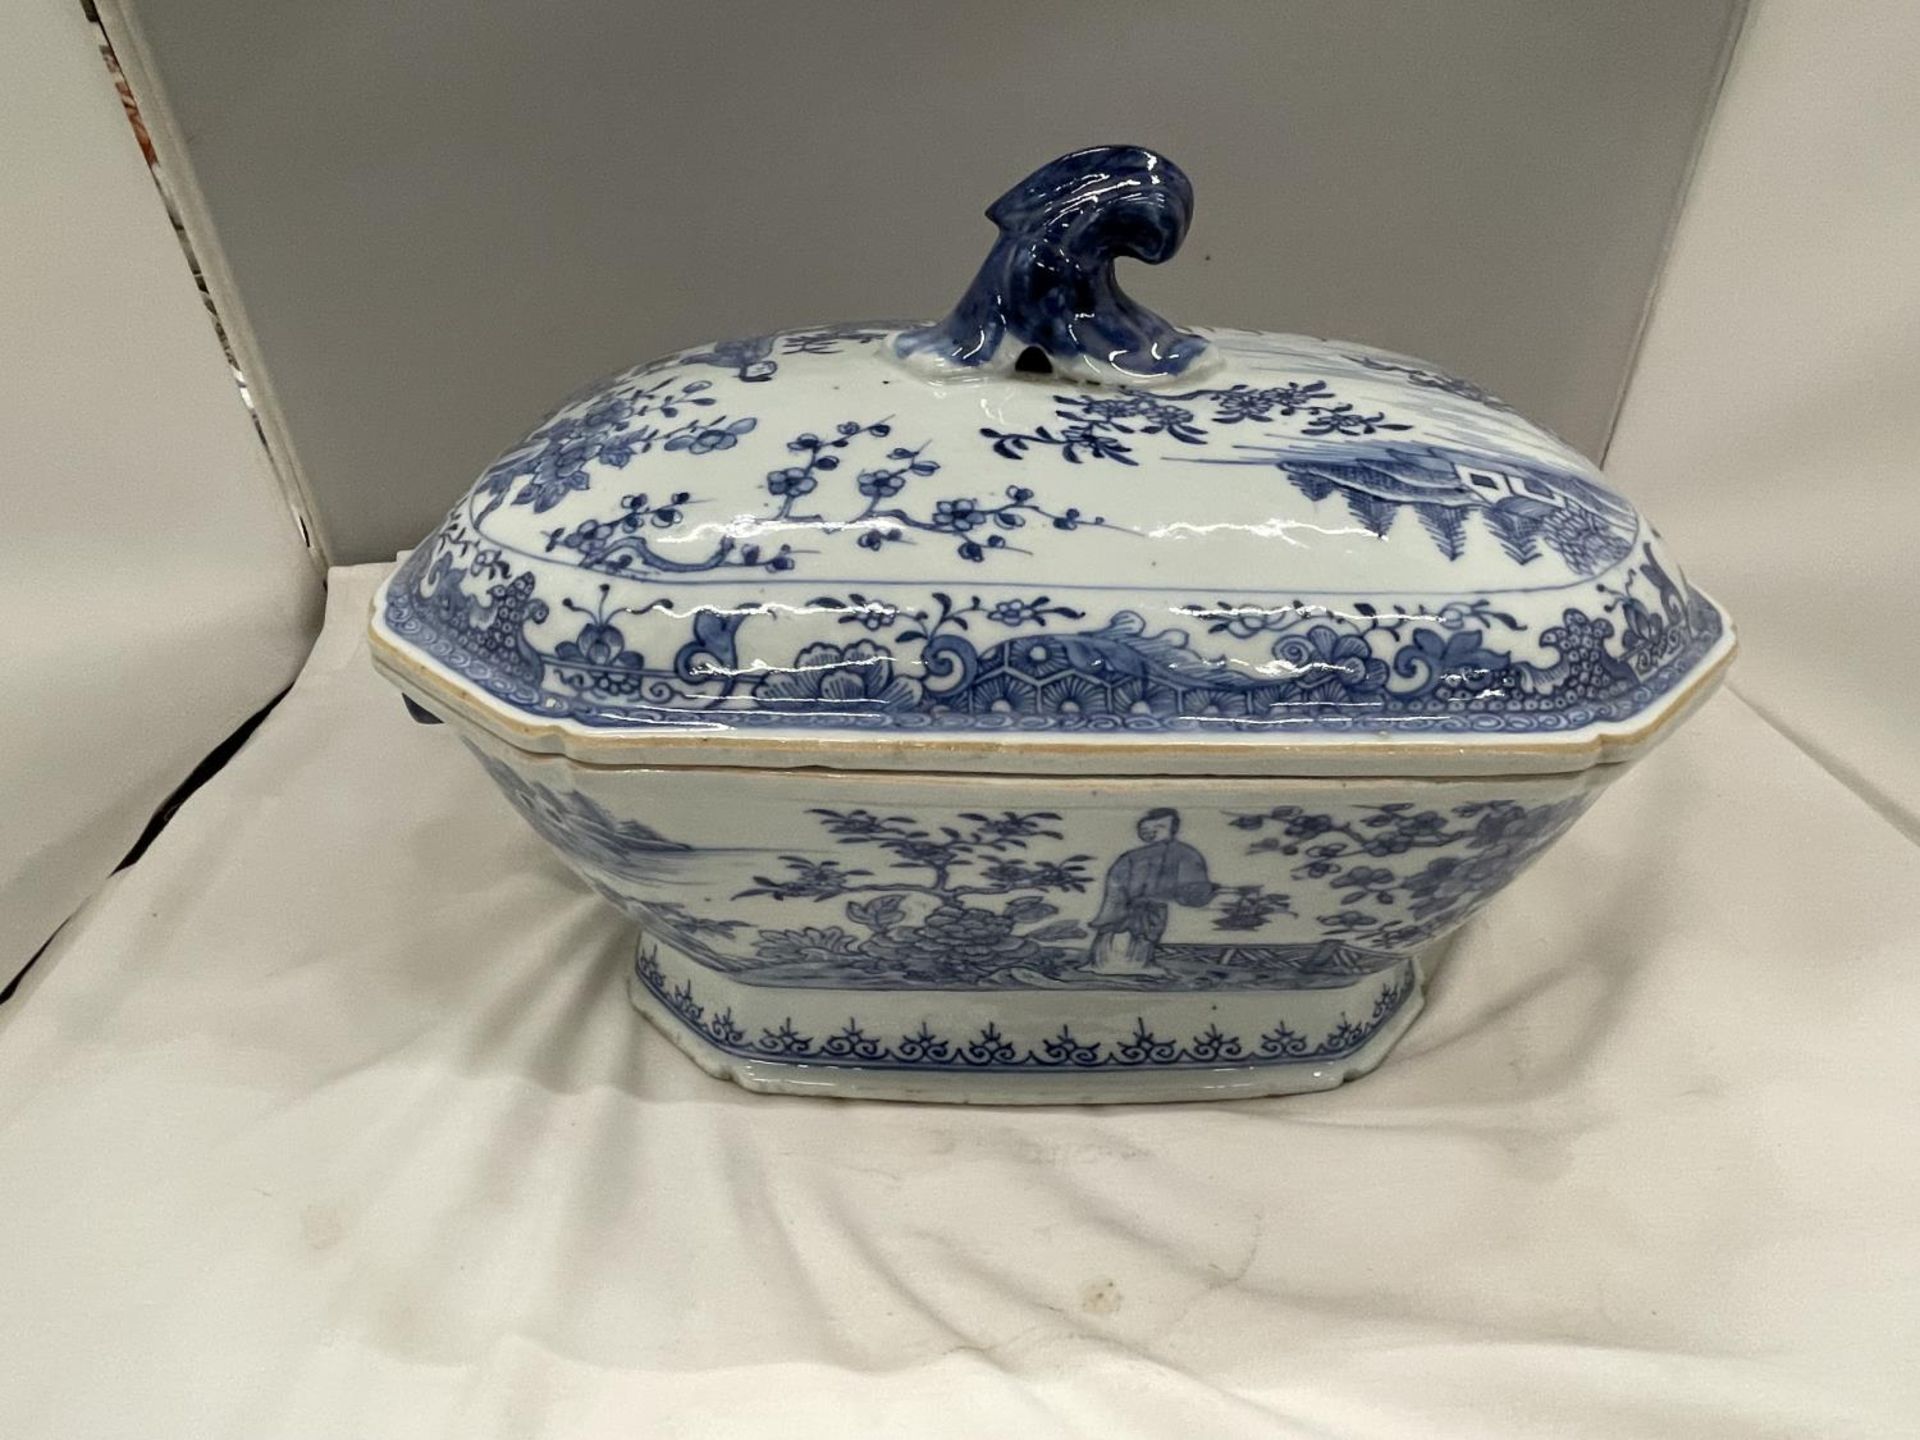 A BELIEVED TO BE LATE 18TH/EARLY 19TH CENTURY CHINESE QING DYNASTY/NANKIN BLUE AND WHITE LARGE - Image 6 of 9